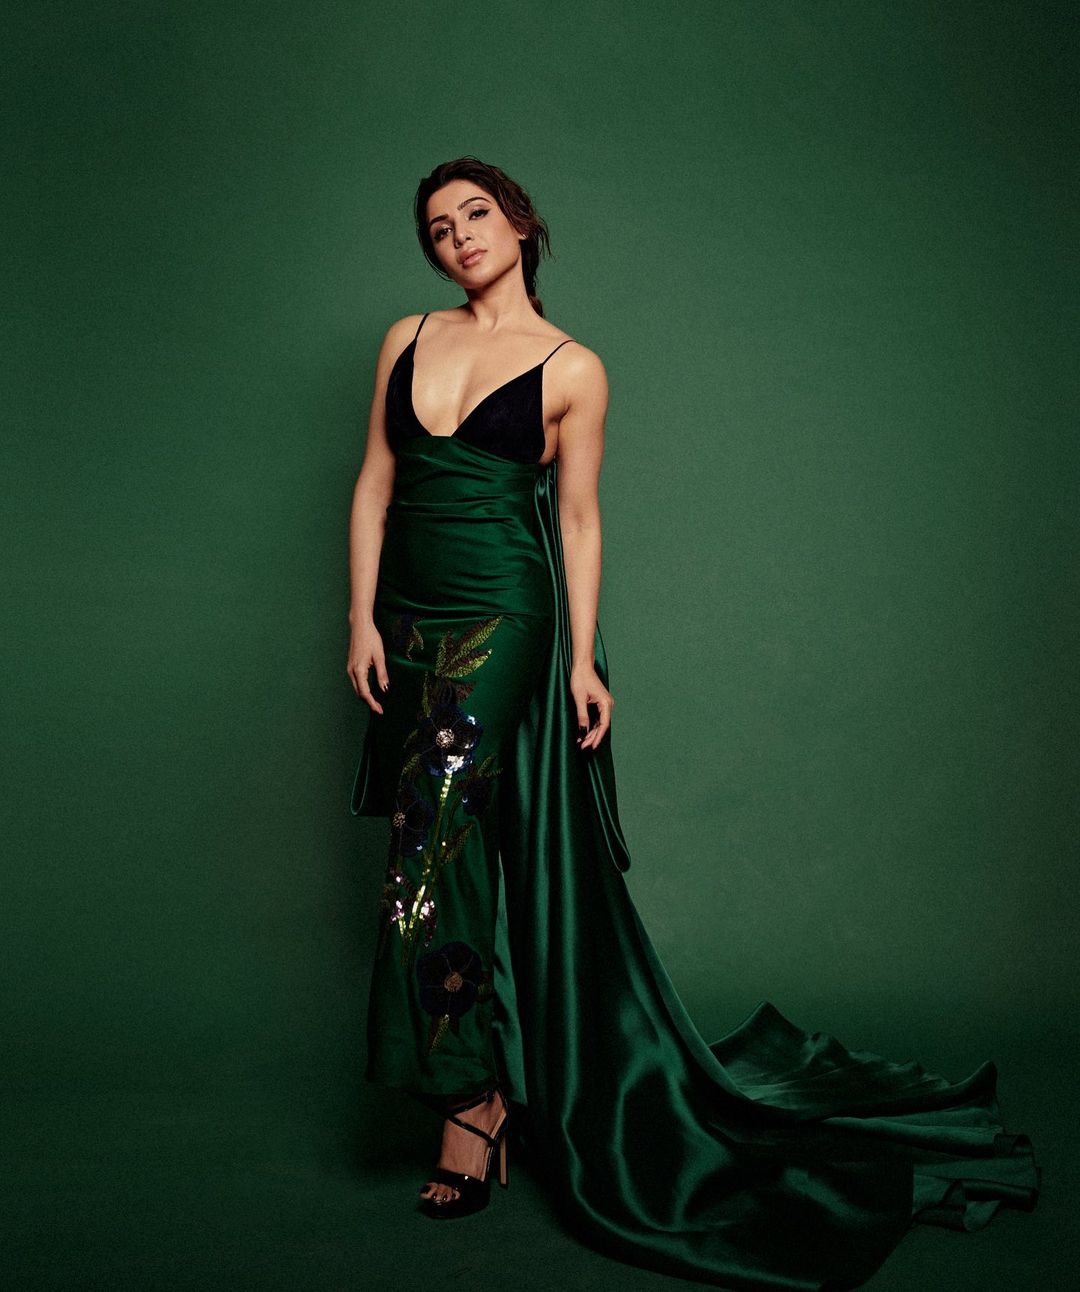 Samantha Ruth Prabhu Looks Breathtakingly Gorgeous In Latest Pictures In a Deep-Neck Green and Black Gown